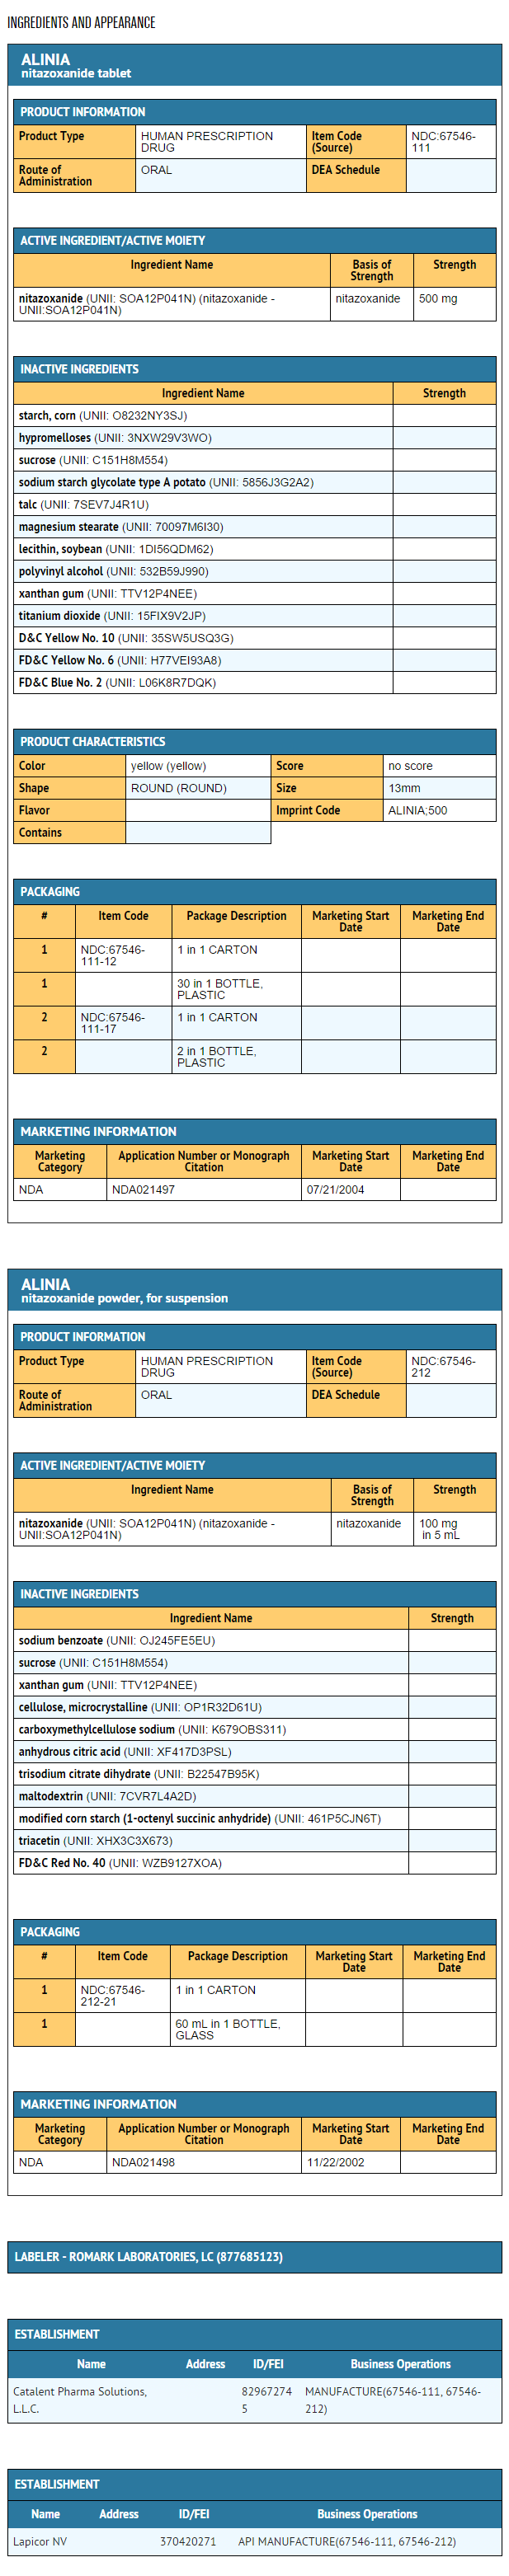 File:Alinia ingredients and appearance.png